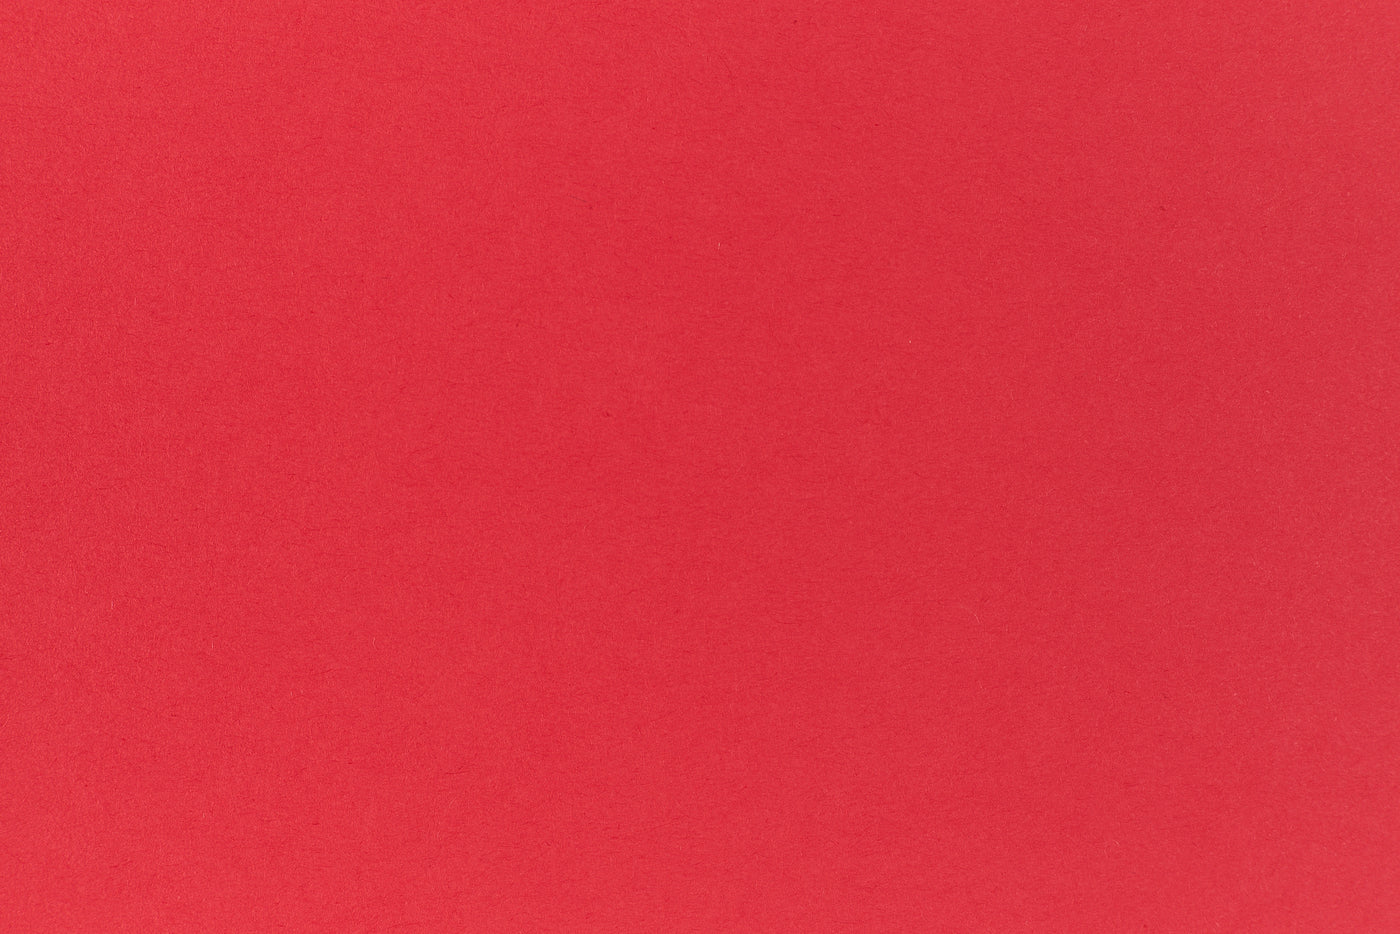 Red Hot Paper (Pop-Tone, Text Weight)